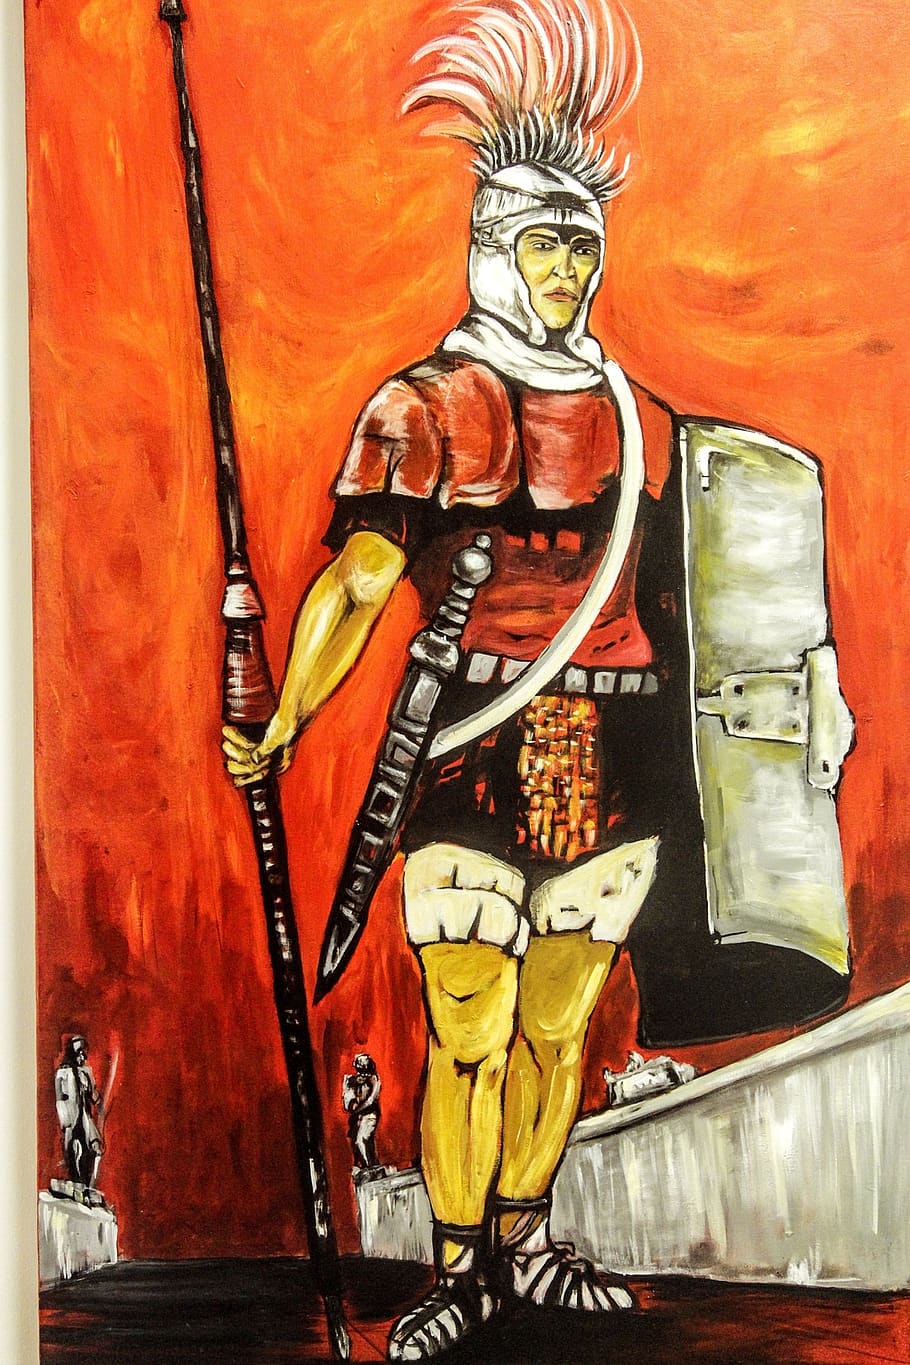 painting, troy, soldier, armor, sword, warrior, helm, spear, art and craft, human representation